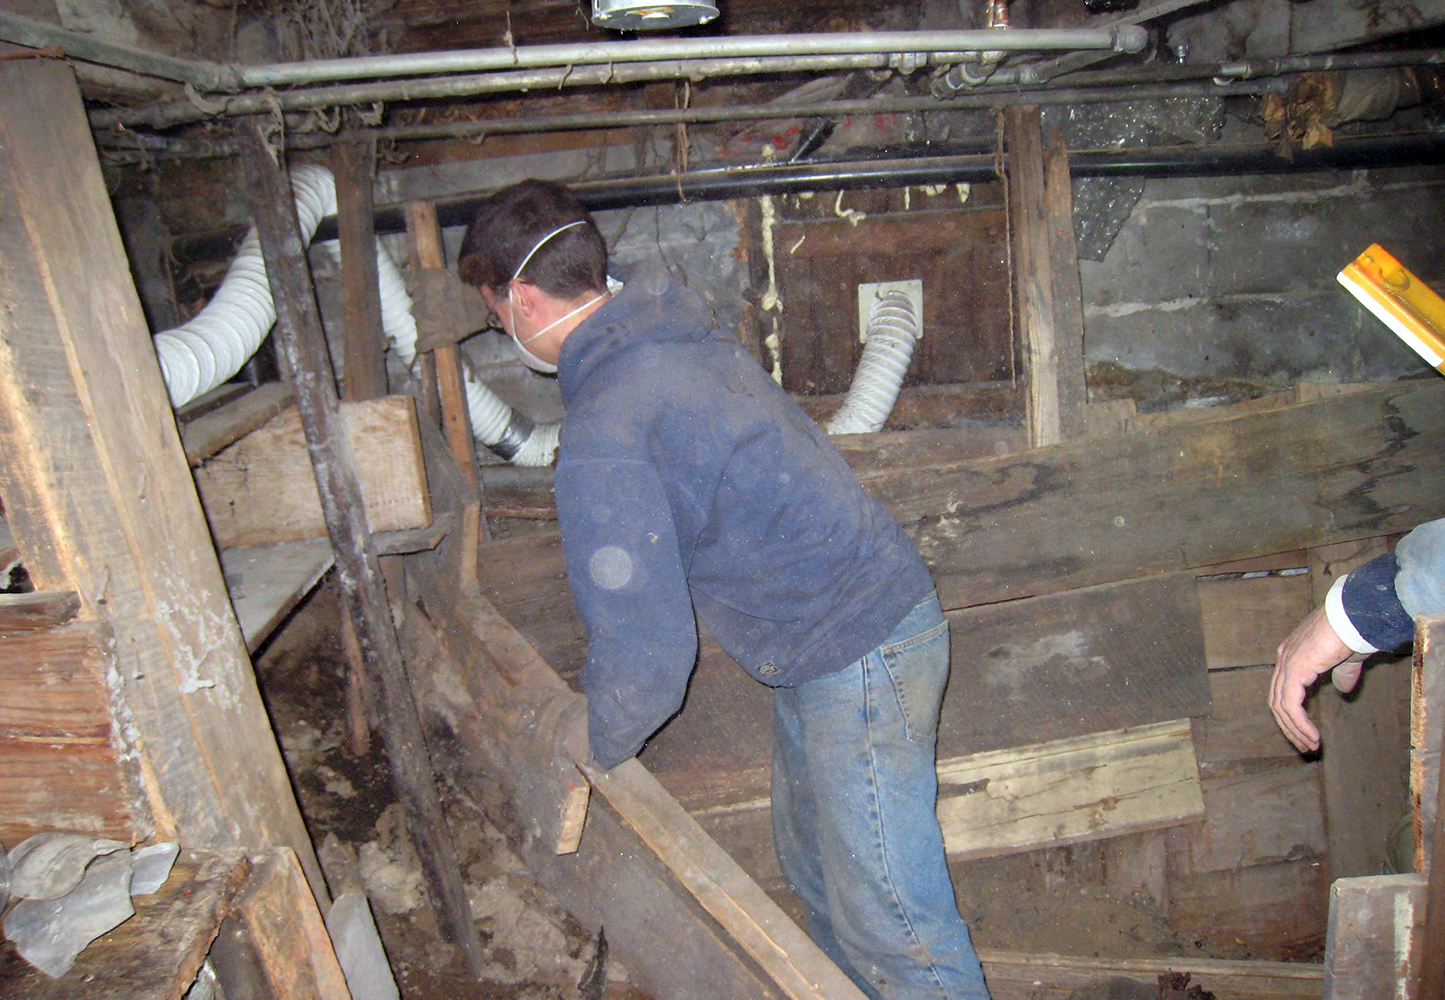 Kyle ripping out boards in the basement to make digging easier. Jim's quart J. Tune was found behind the small wall to the left.